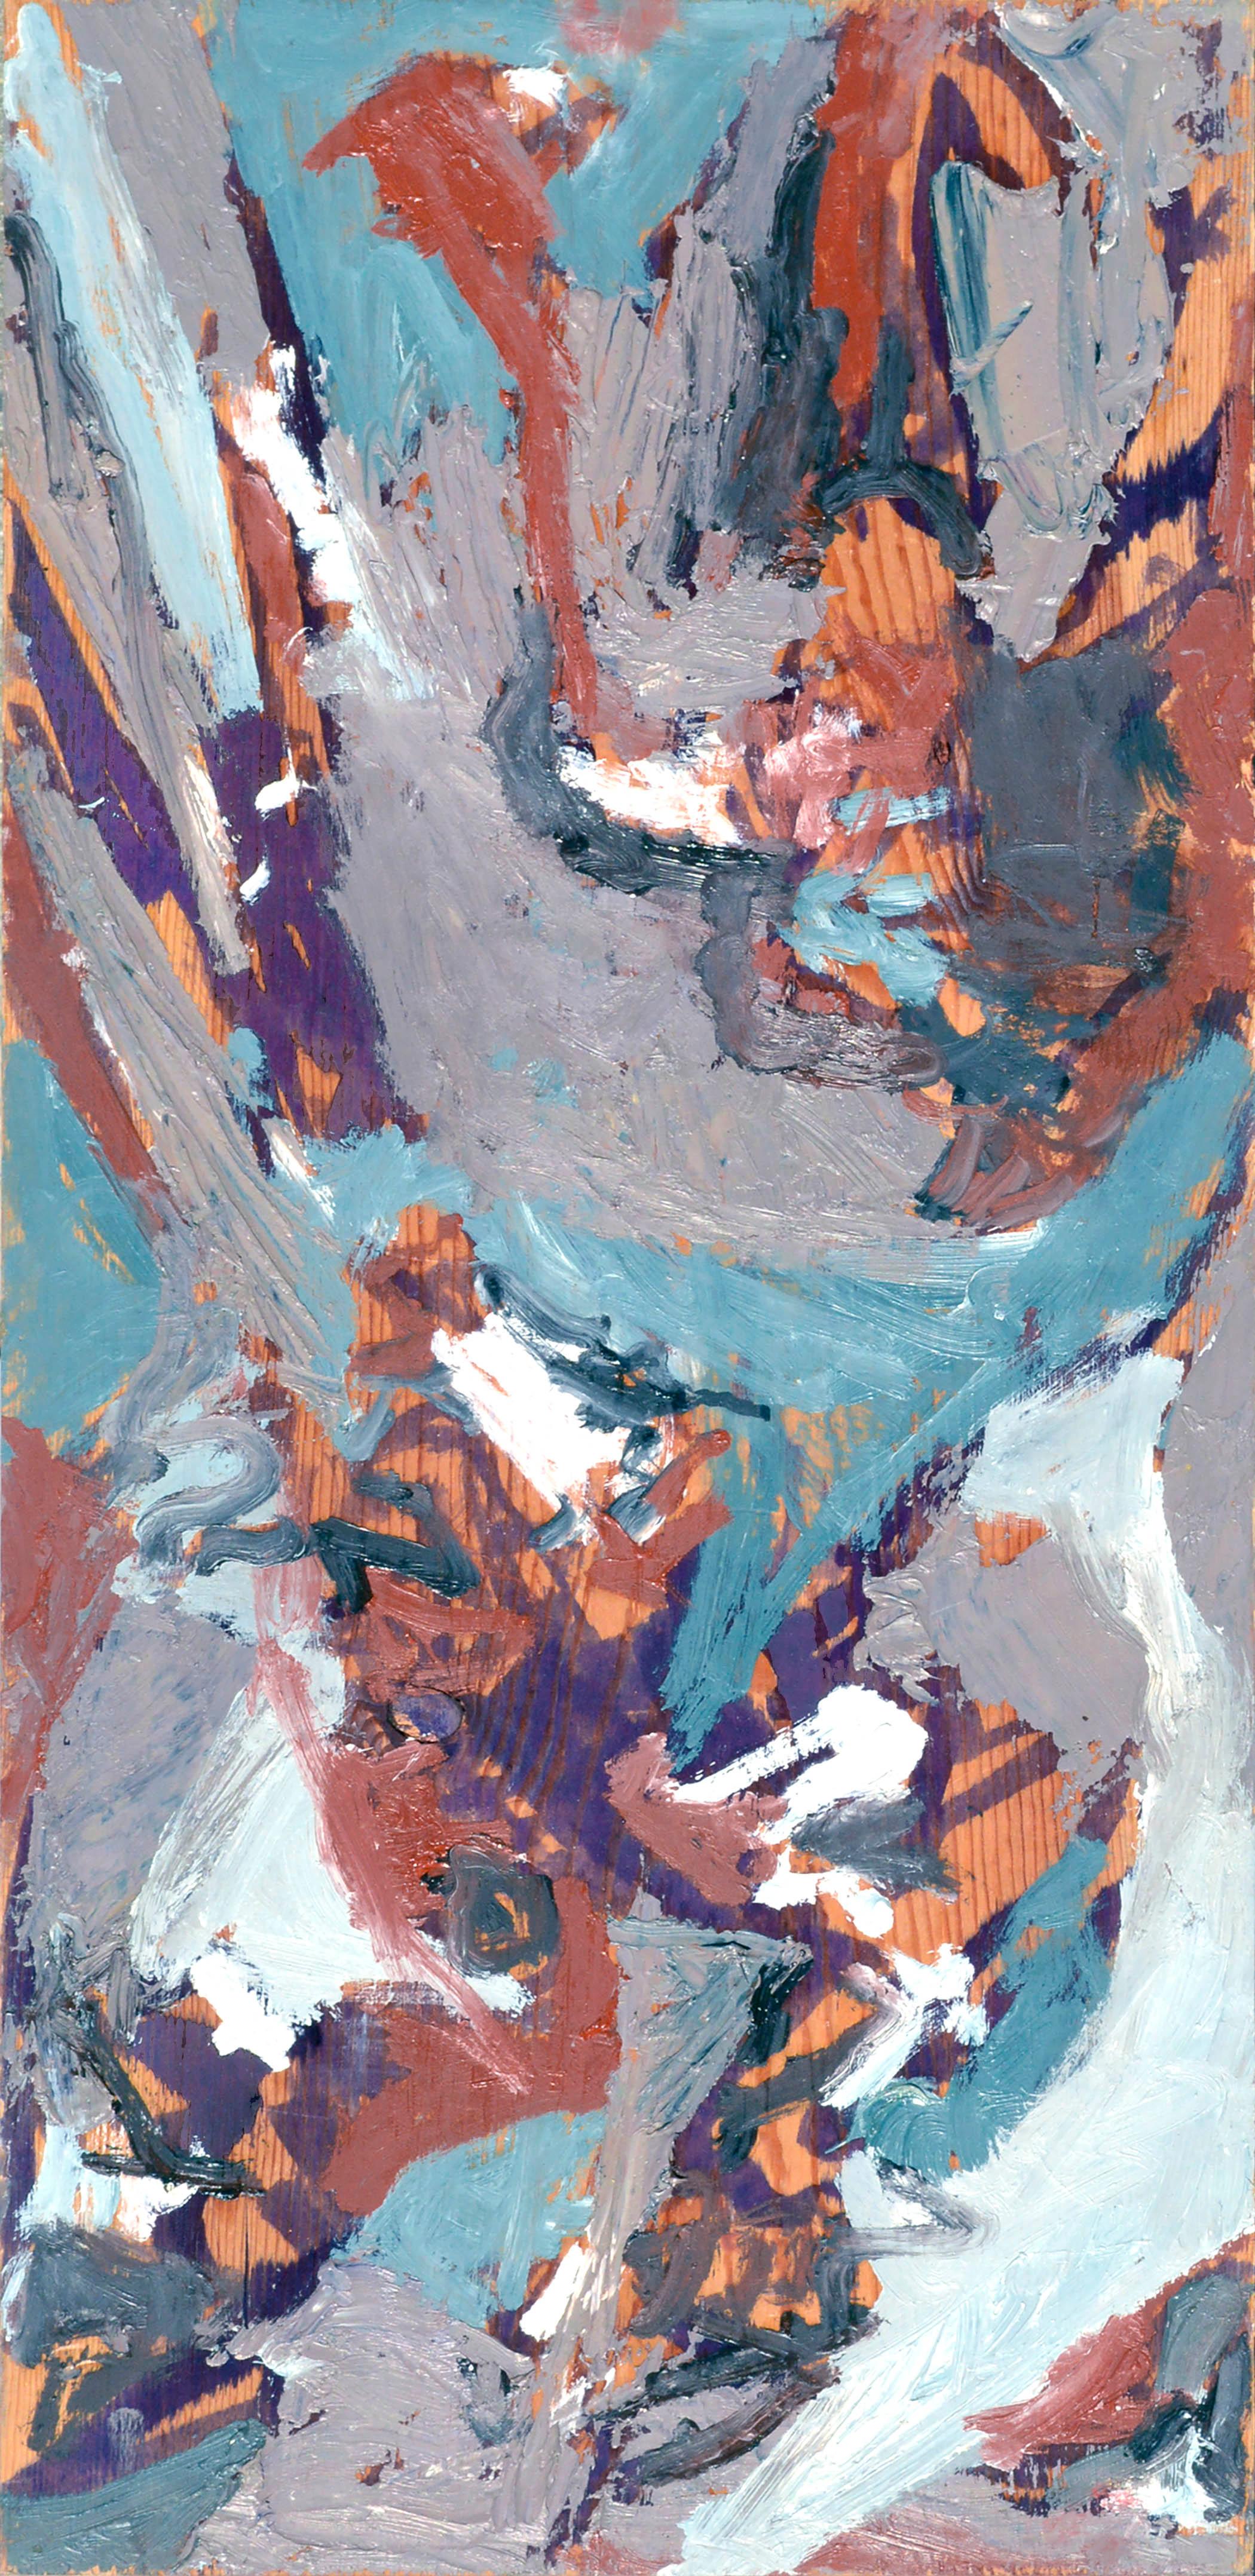 Aqua Culture - Blue, Grey, & Brown Impasto Abstract on Wood  - Painting by Michael Pauker 